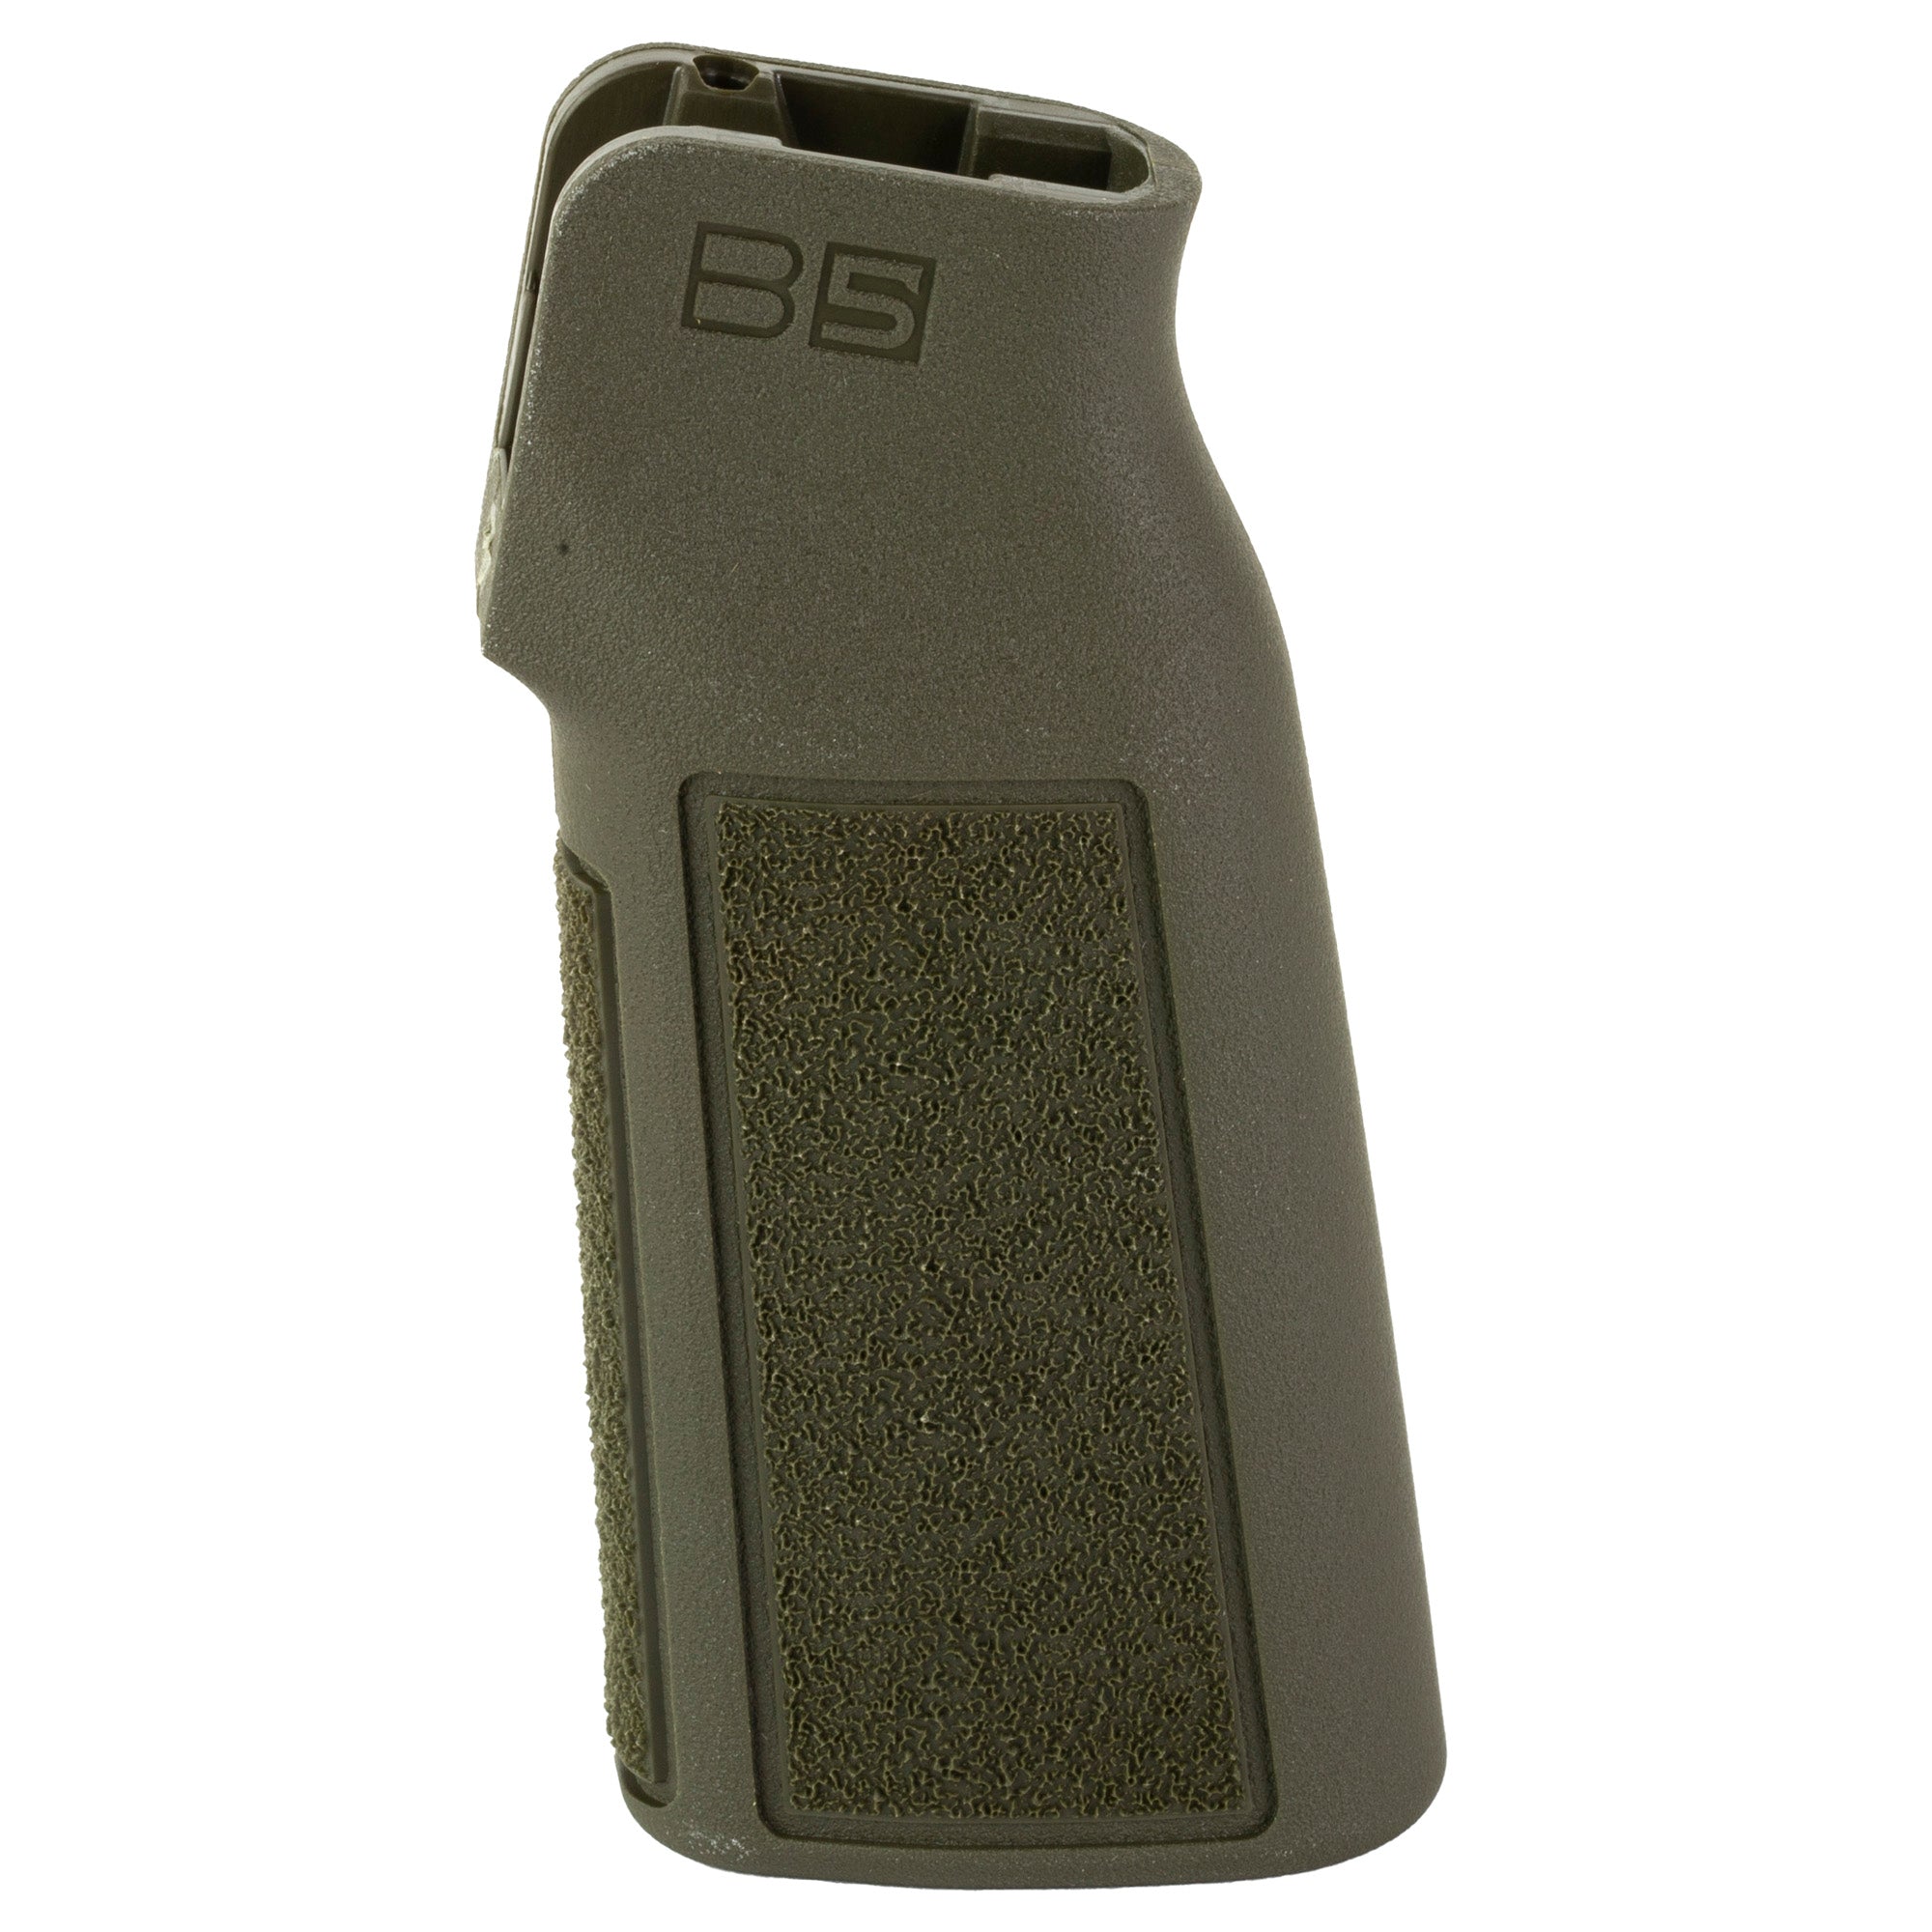 B5 Systems P-Grip Type 22, available in multiple colors, designed for enhanced control and ergonomic grip with aggressive texture.